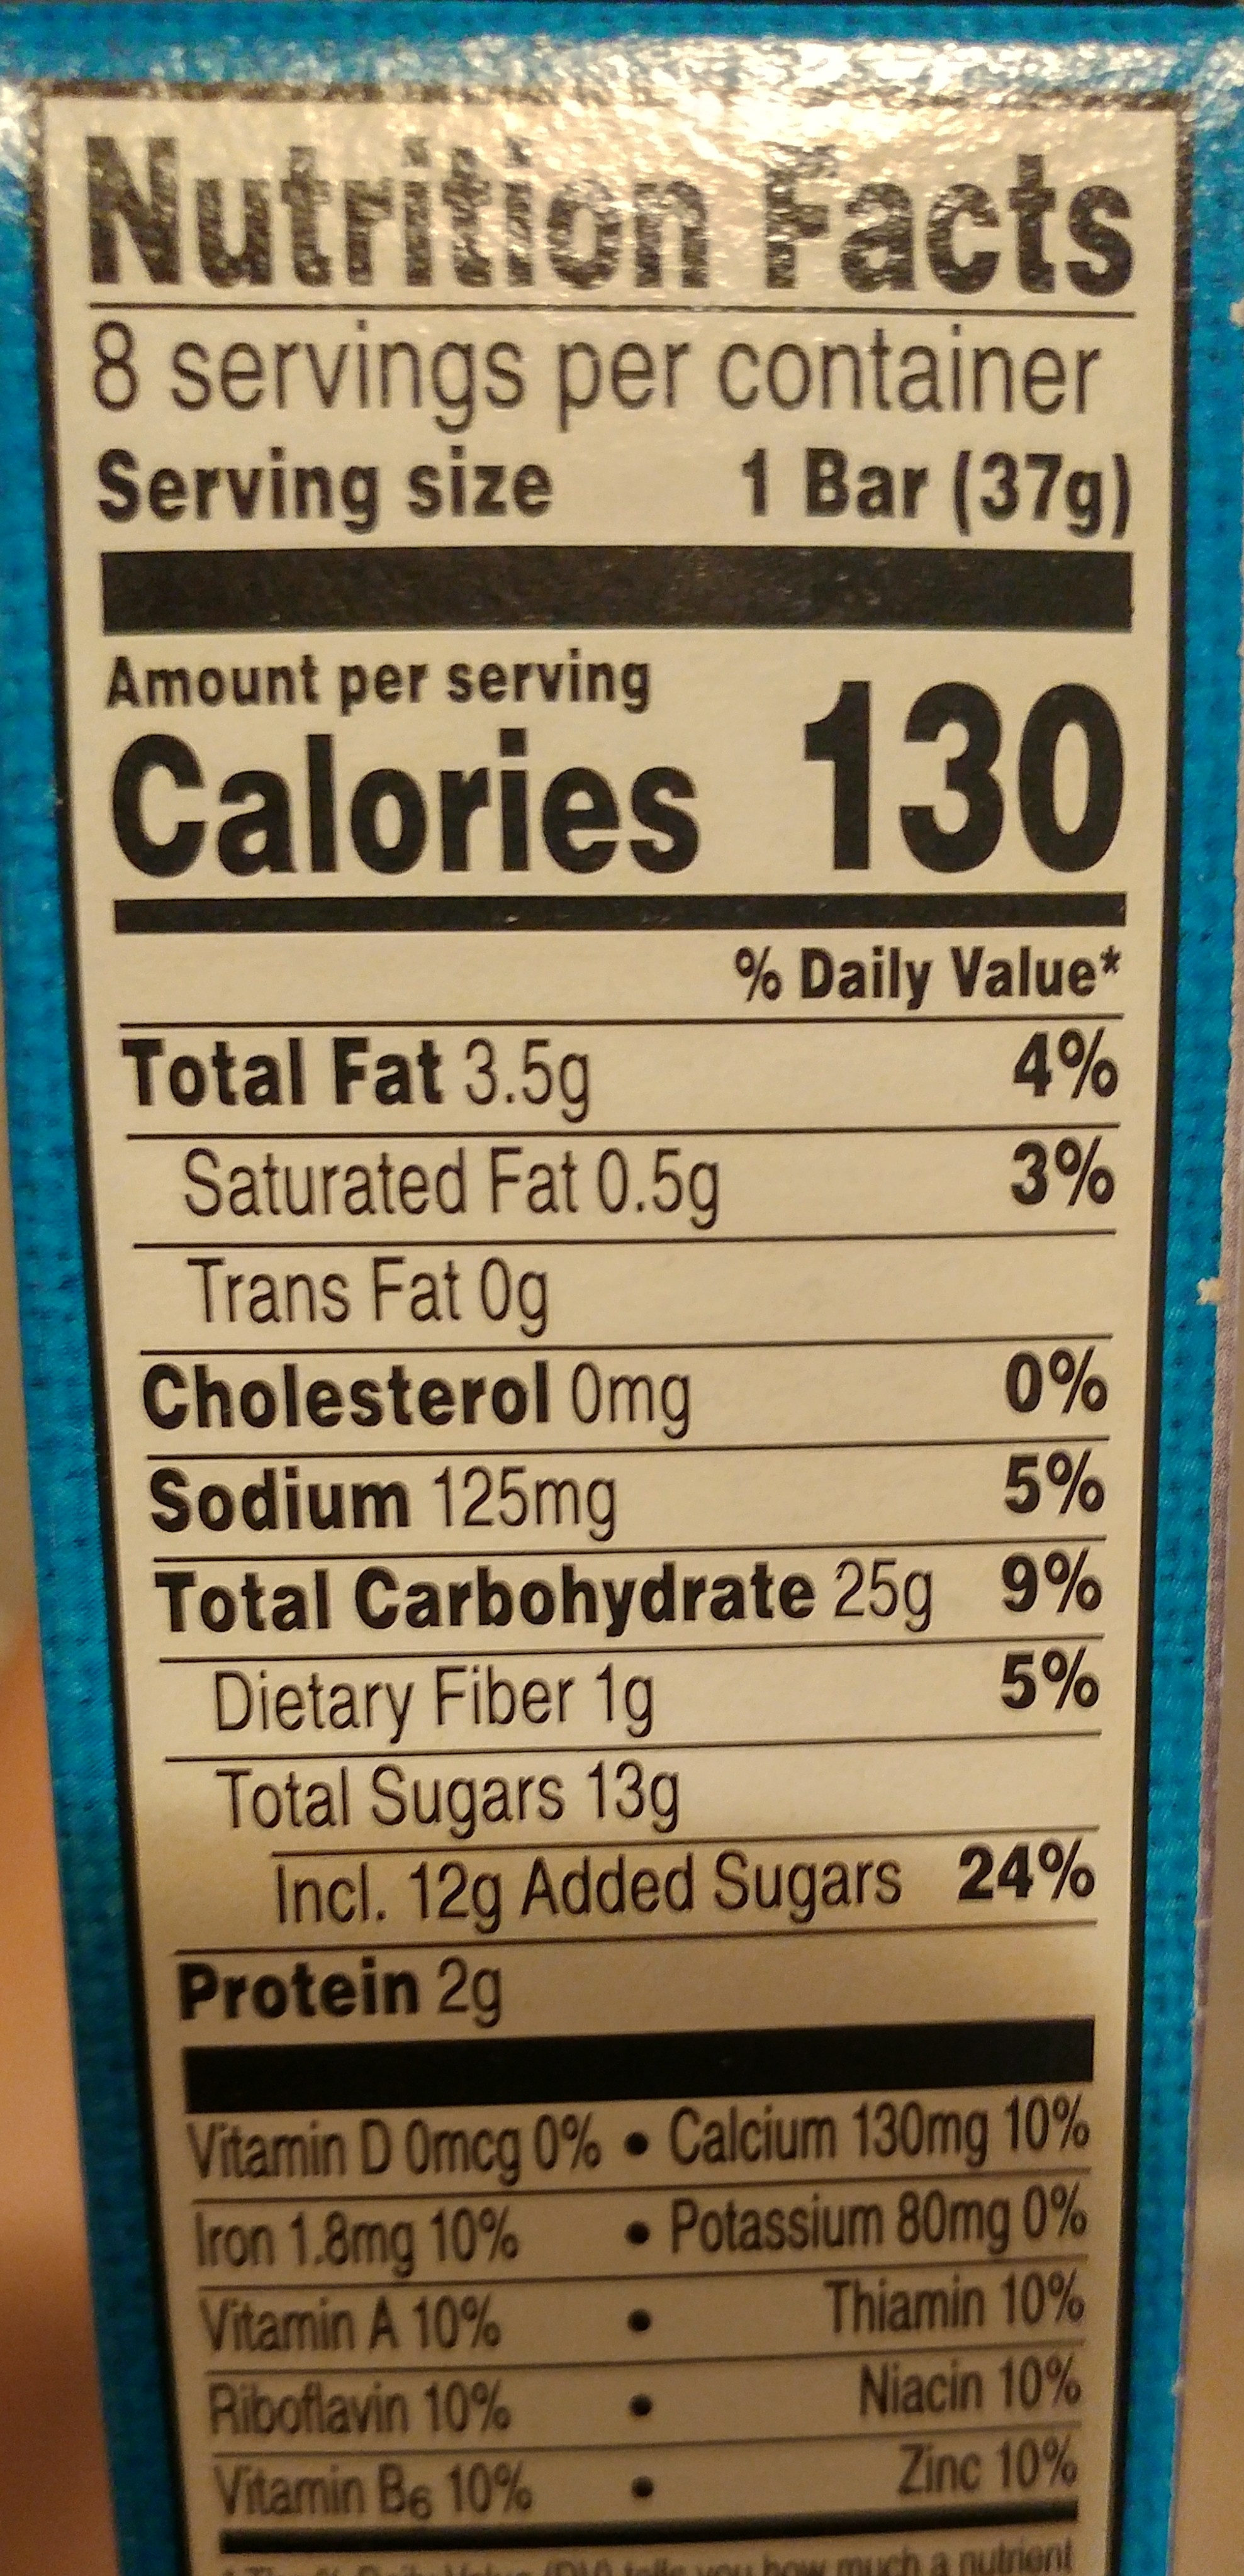 Blueberry soft baked breakfast bars - Nutrition facts